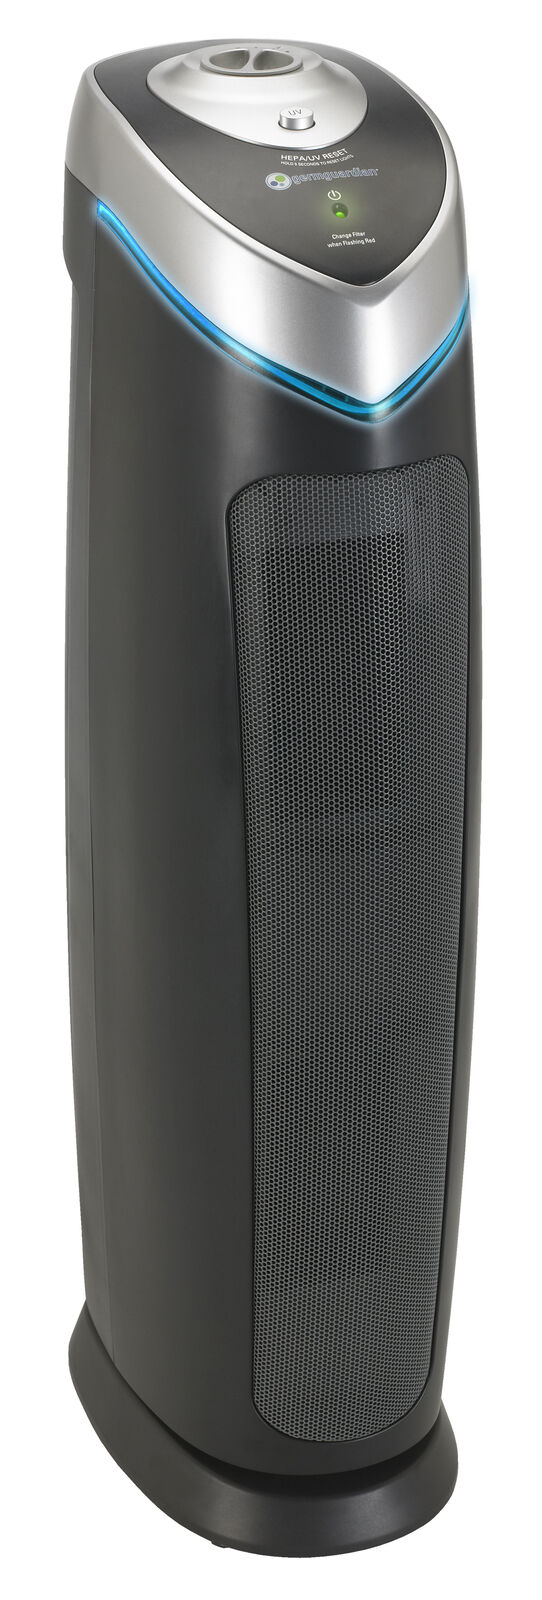 GermGuardian AC5000E 3-in-1 Air Purifier with True HEPA Filter, UV-C Sanitizer,